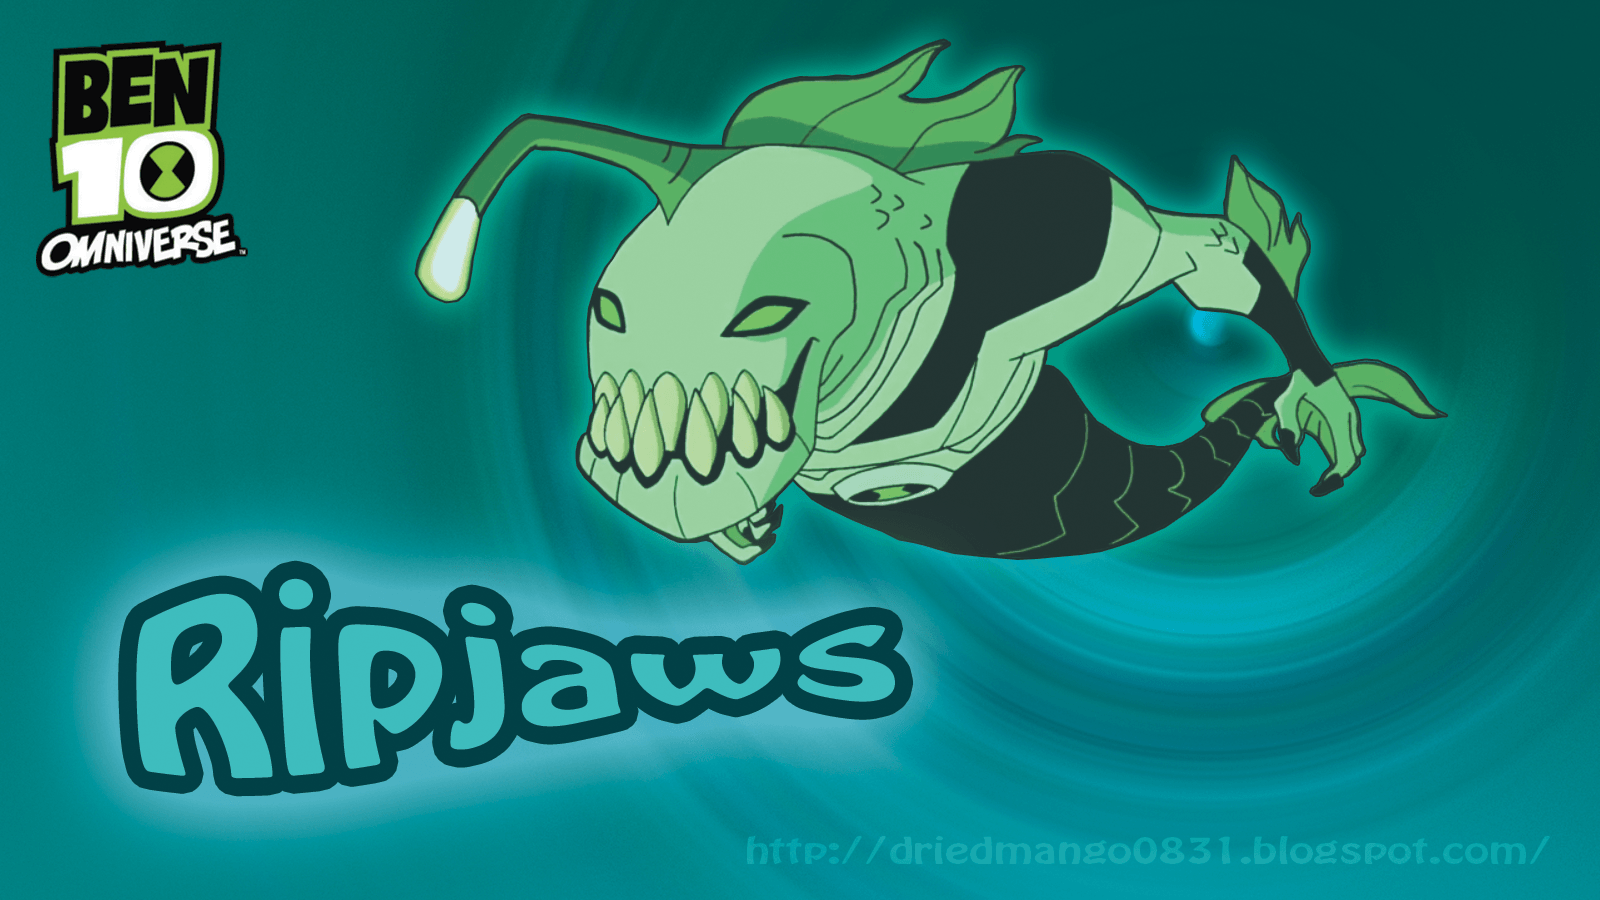 Ben 10 Omniverse image Ripjaws HD wallpaper and background photo